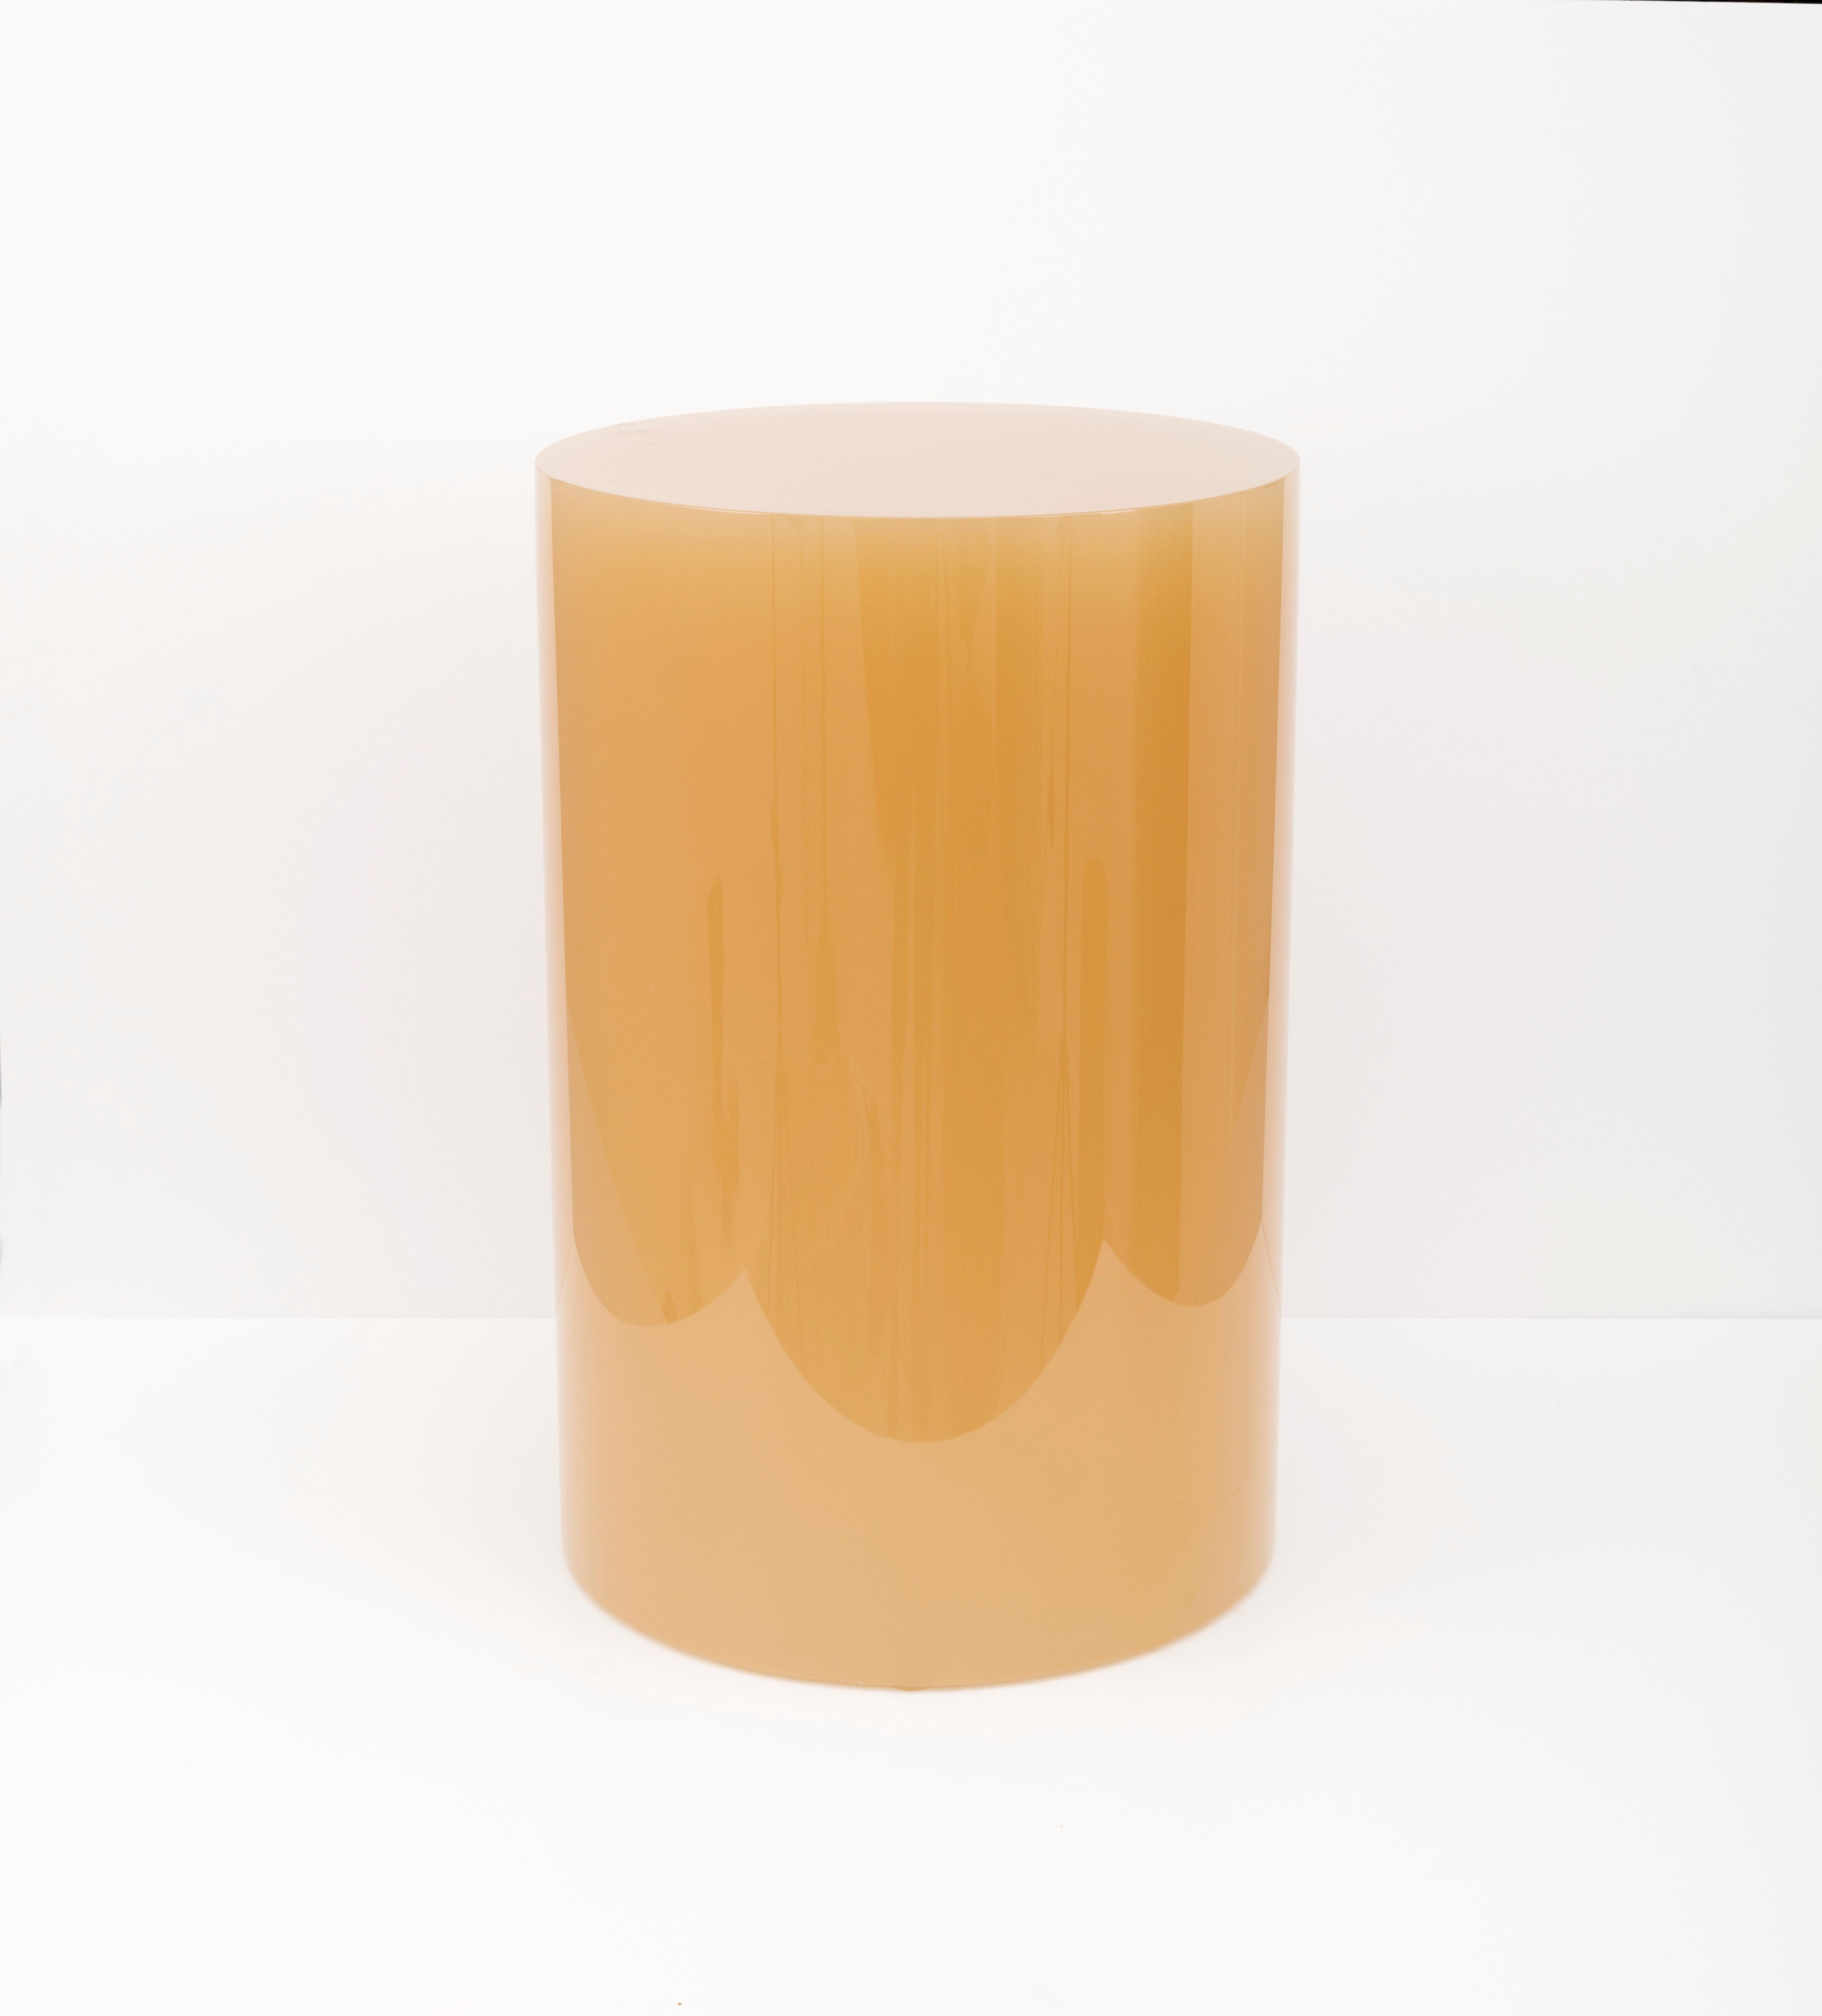 Sabine Marcelis’ glossy resin candy column side table and stools were first unveiled at Life in Vogue in Milan, creating a dynamic mise-en-scéne with yellow and caramel tones.

Colour and height are customizable.
Available sizes: 

34 x 40 cm

34 x